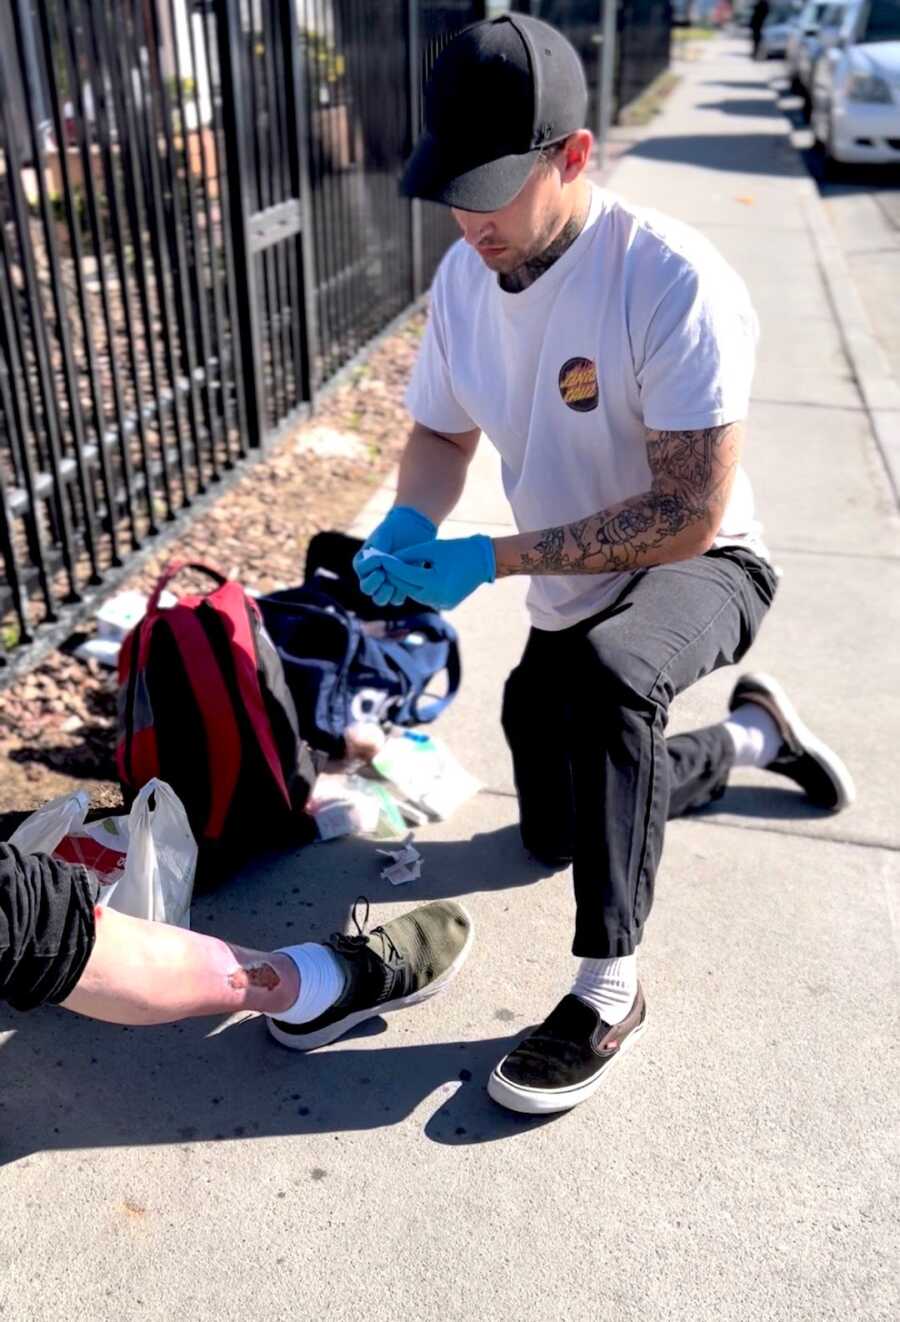 recovering addict helping those in need bandage a wound